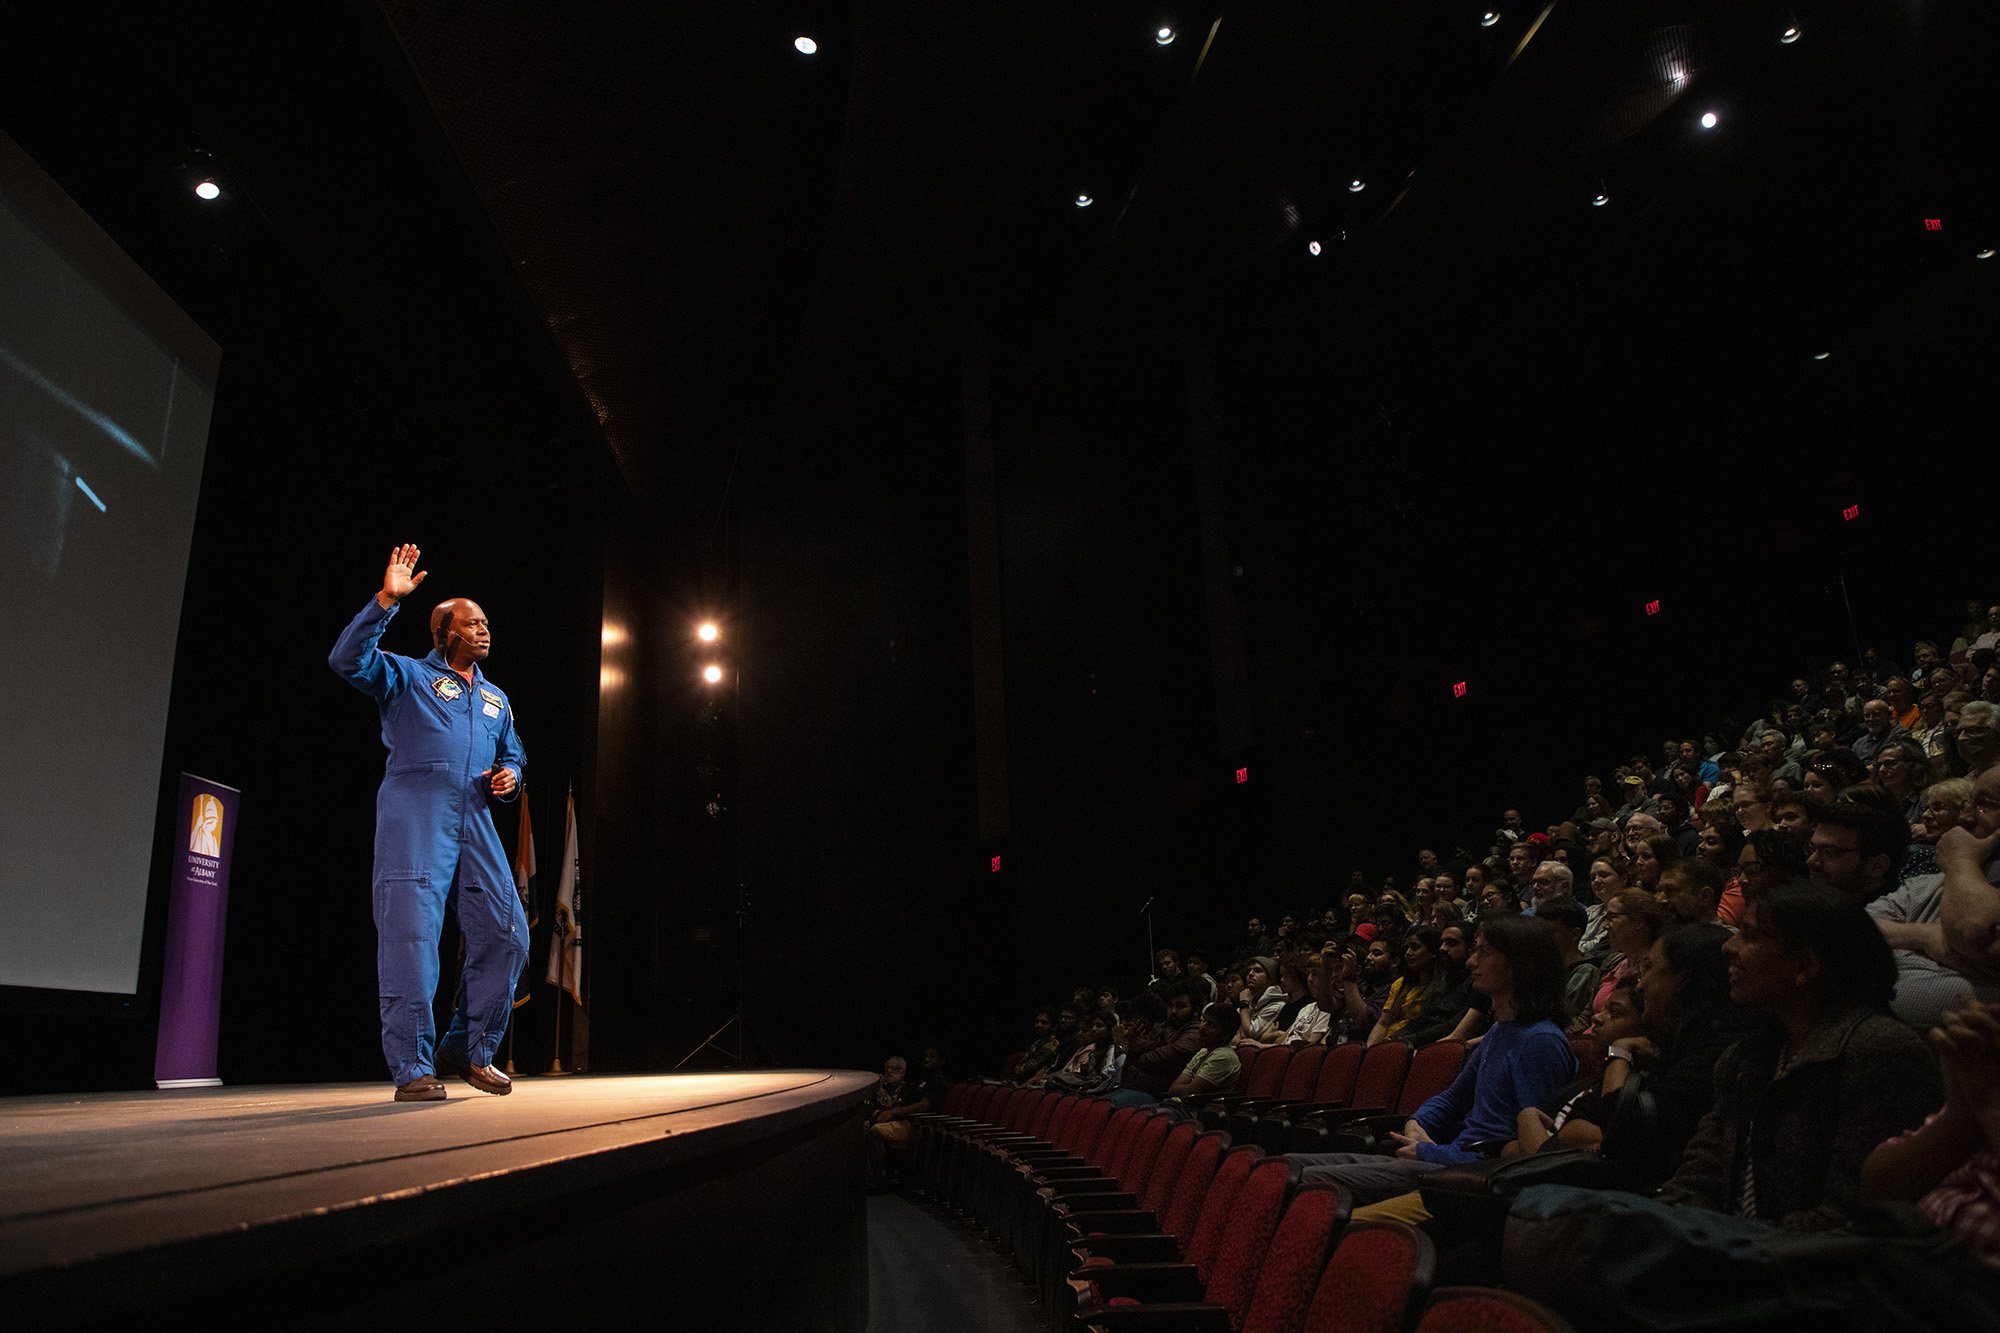 Former Astronaut Leland Melvin delivers the 10th Annual Bunshaft Lecture at UAlbany's Performing Arts Center.